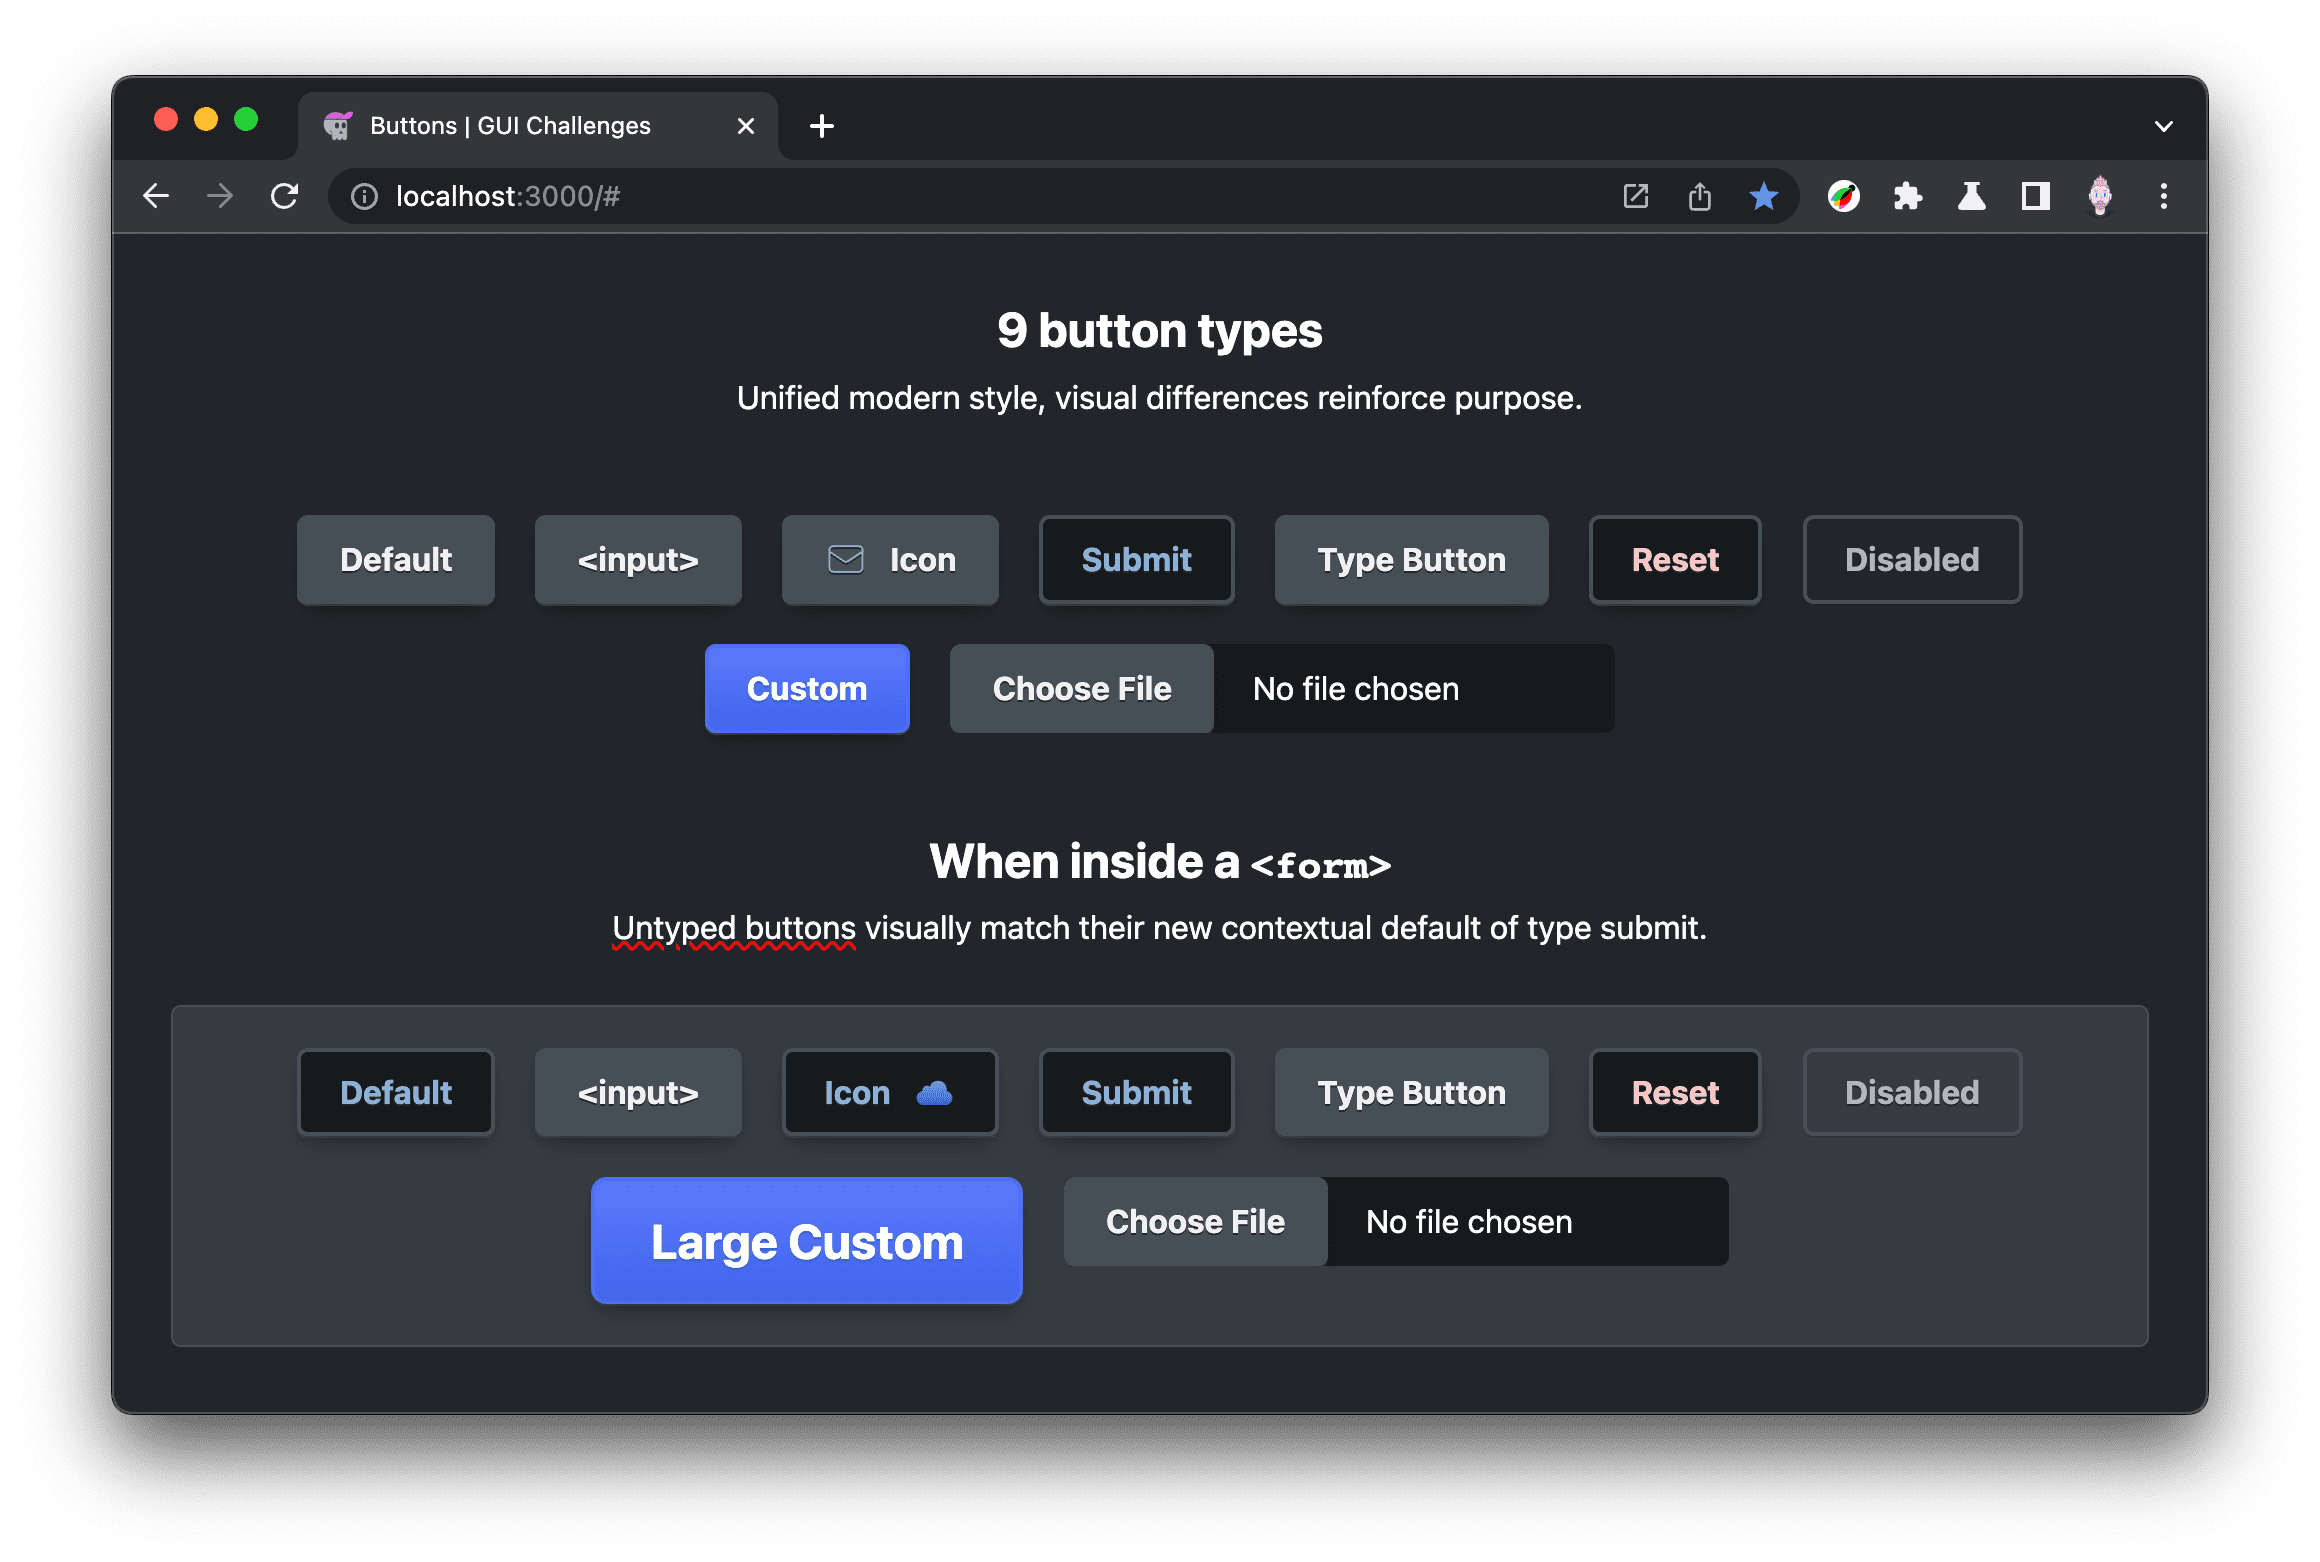 Preview of the final set of all button types in the dark theme.